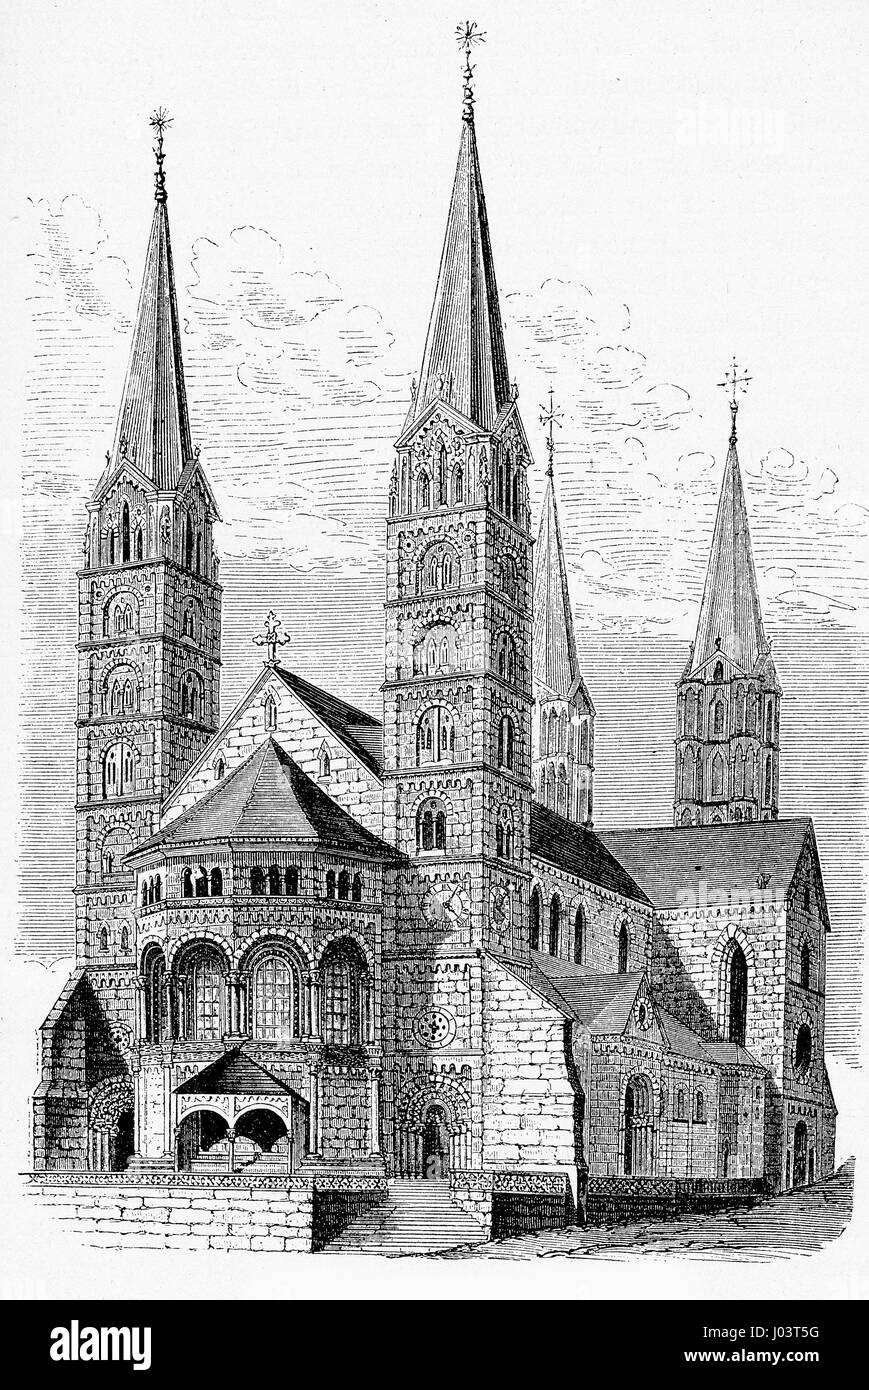 Antique engraving of Bamberger Dom St. Peter und St. Georg, Bamberg - Germany cathedral built in XIII century in Romanesque and Gothic style Stock Photo